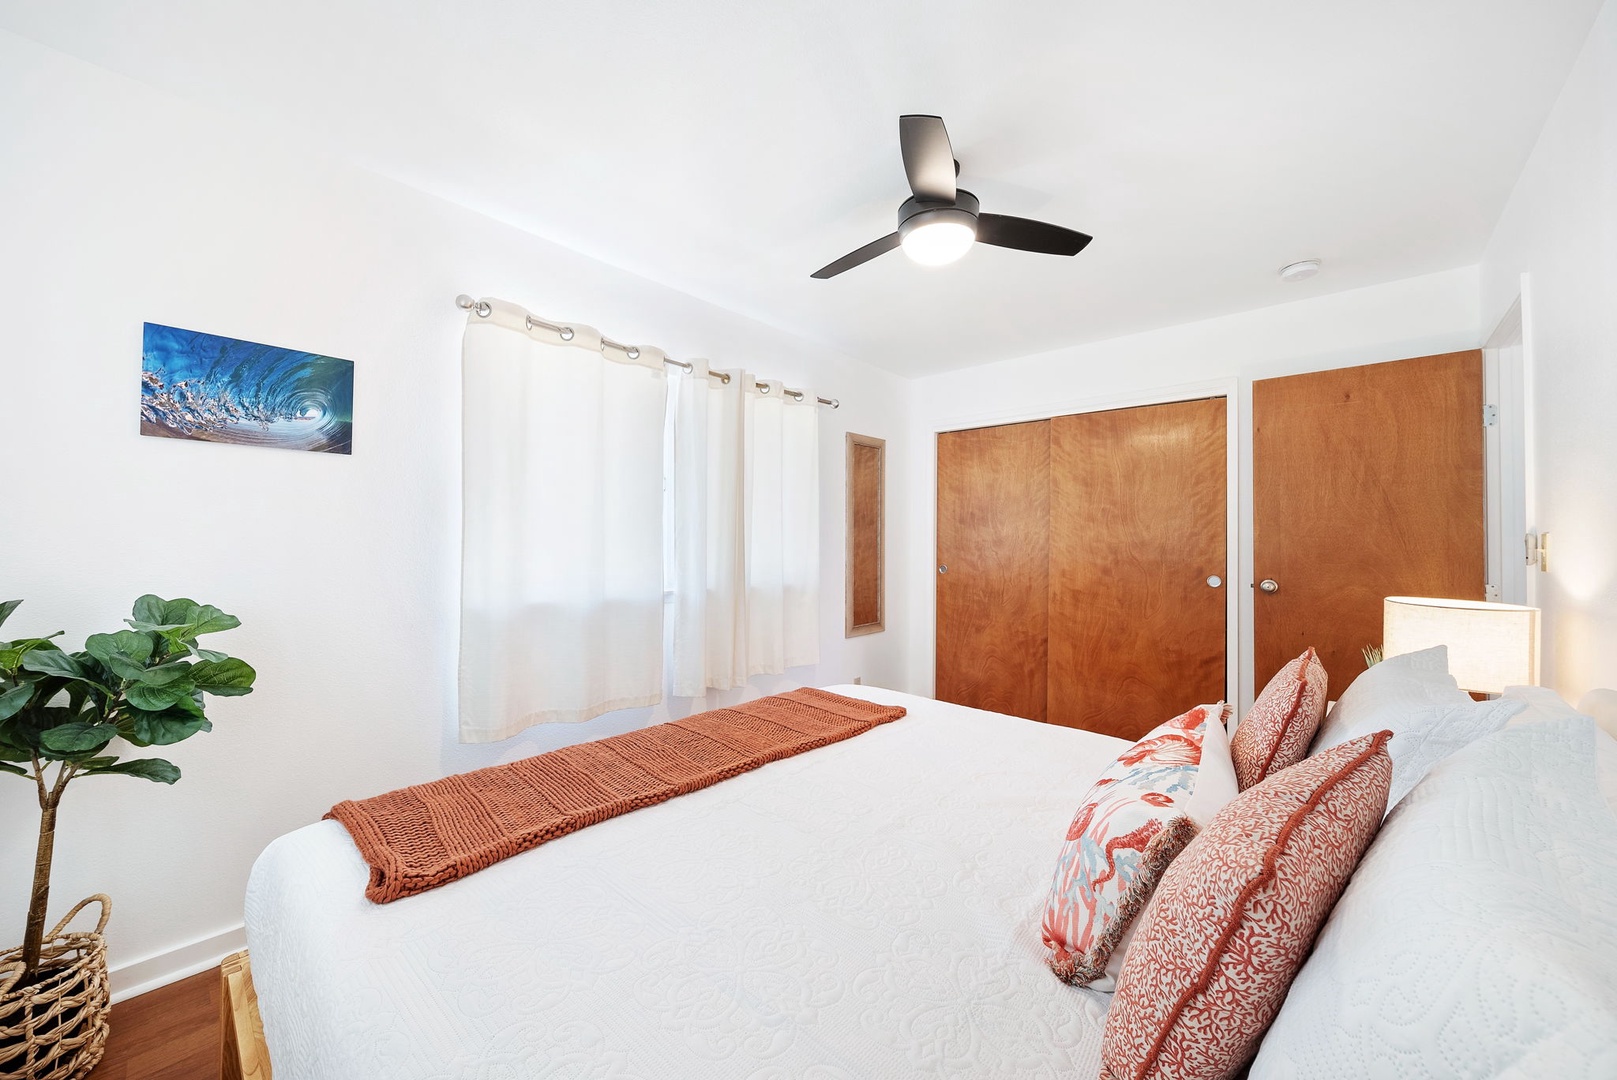 Haleiwa Vacation Rentals, Pikai Hale - Enjoy the comfort of the Primary Bedroom, equipped with a ceiling fan to keep you cool